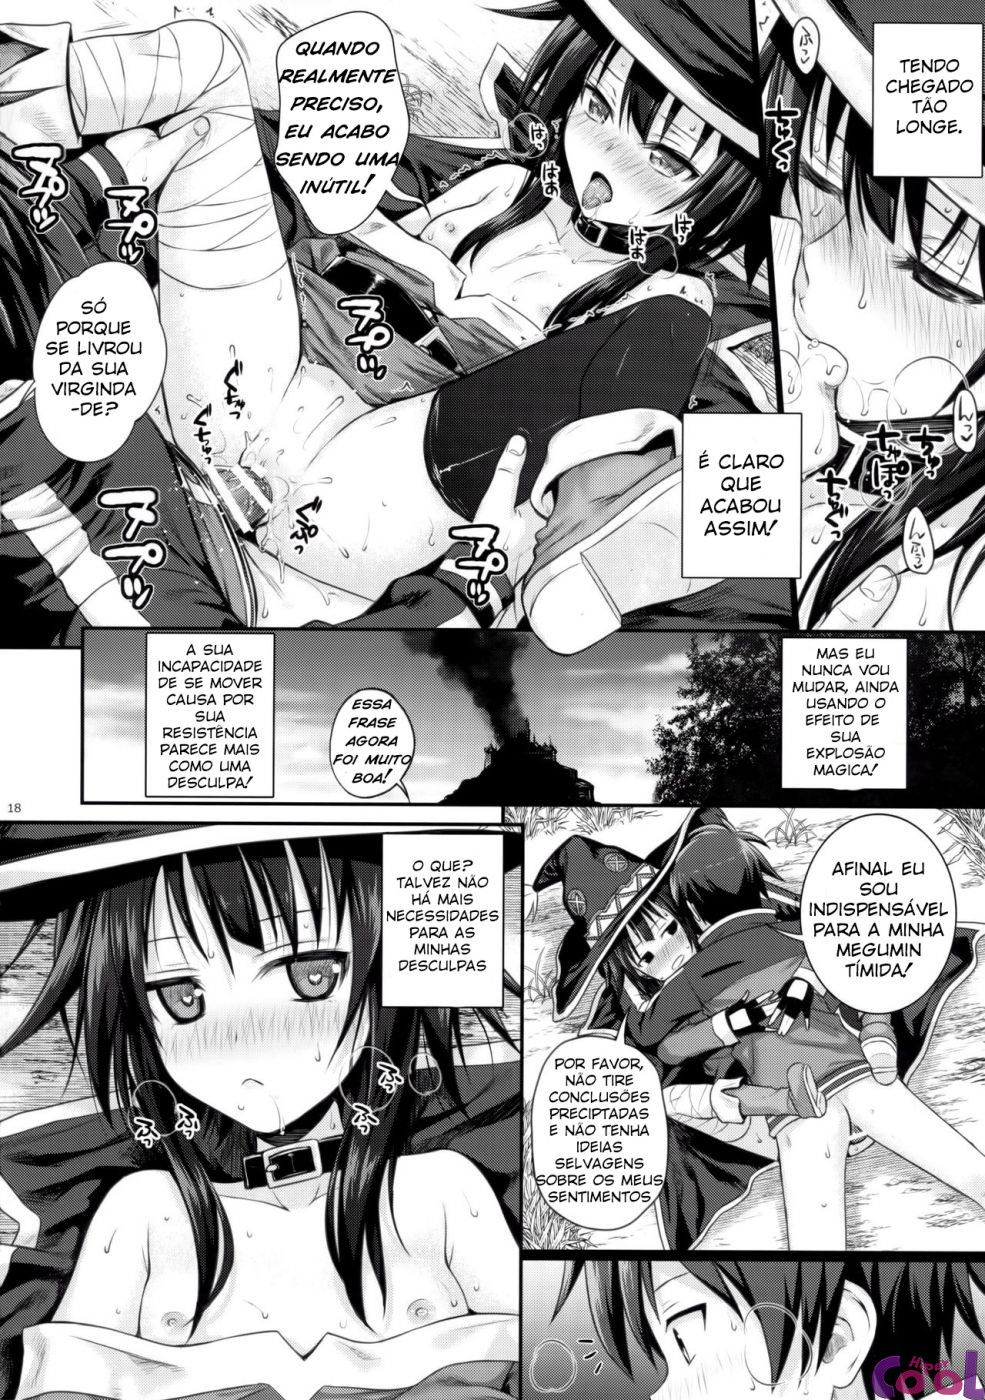 choygedo-chapter-01-page-18.jpg